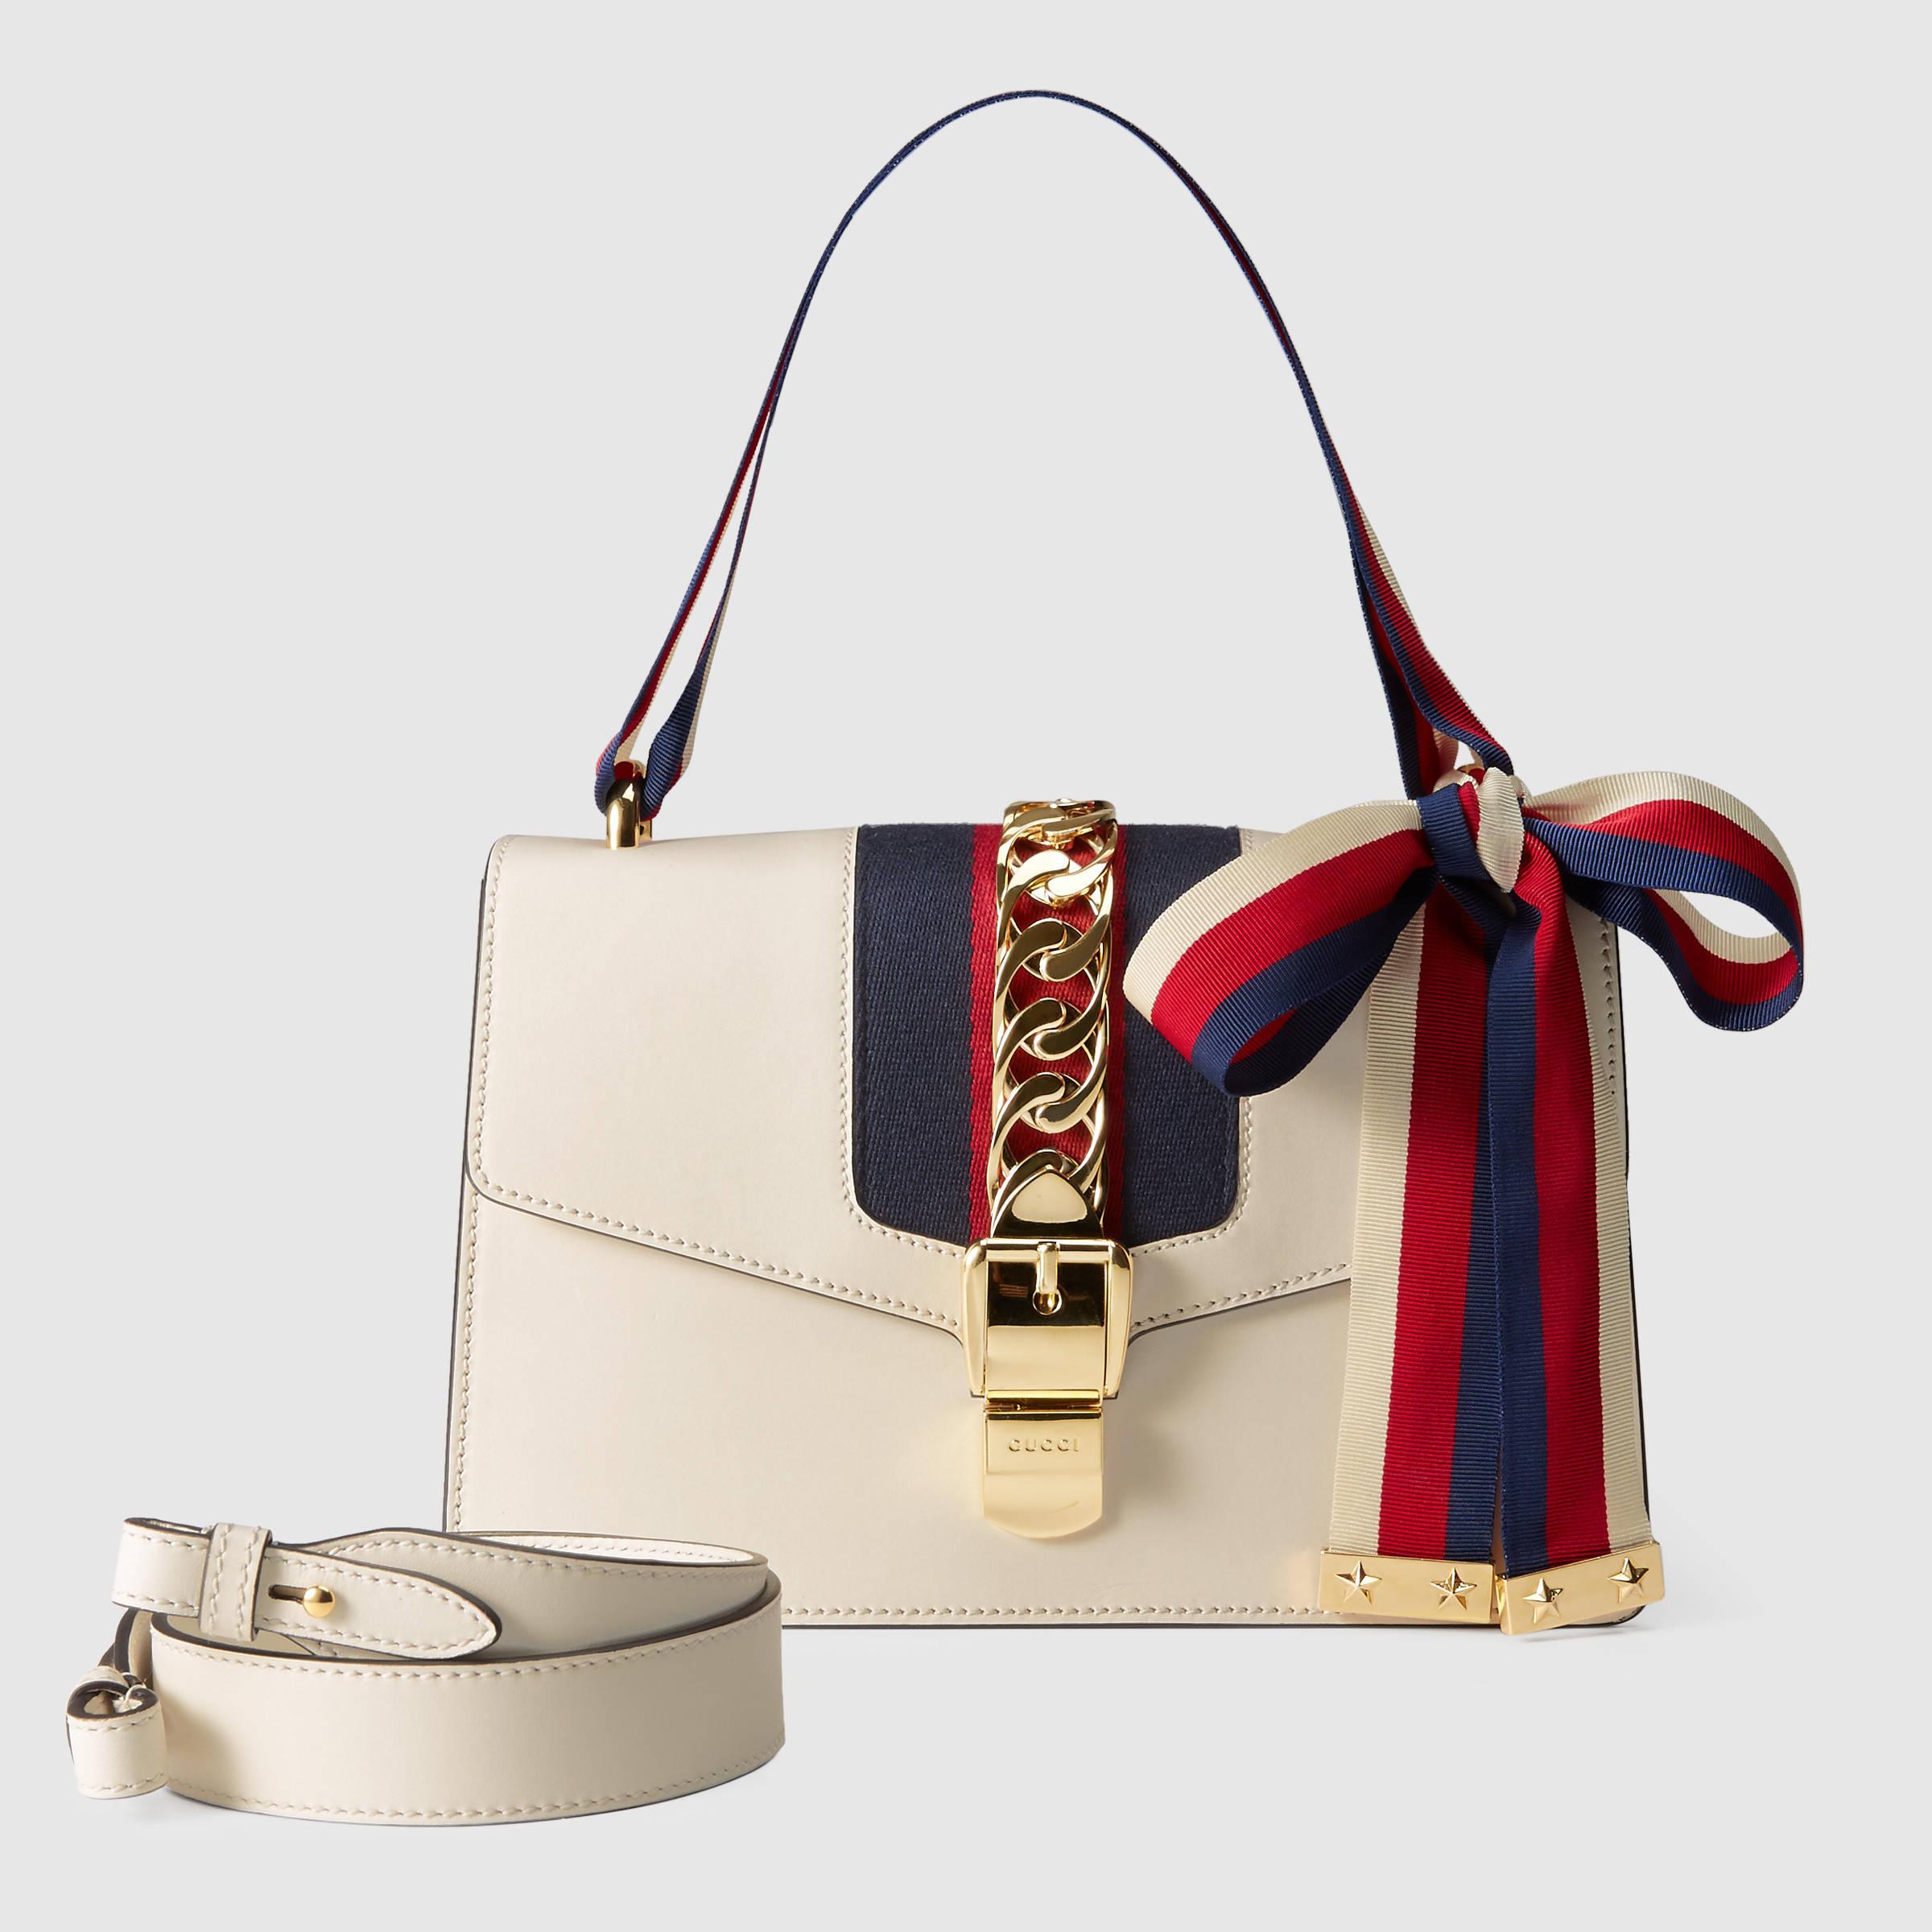 Gucci Sylvie Leather Shoulder Bag in White | Lyst